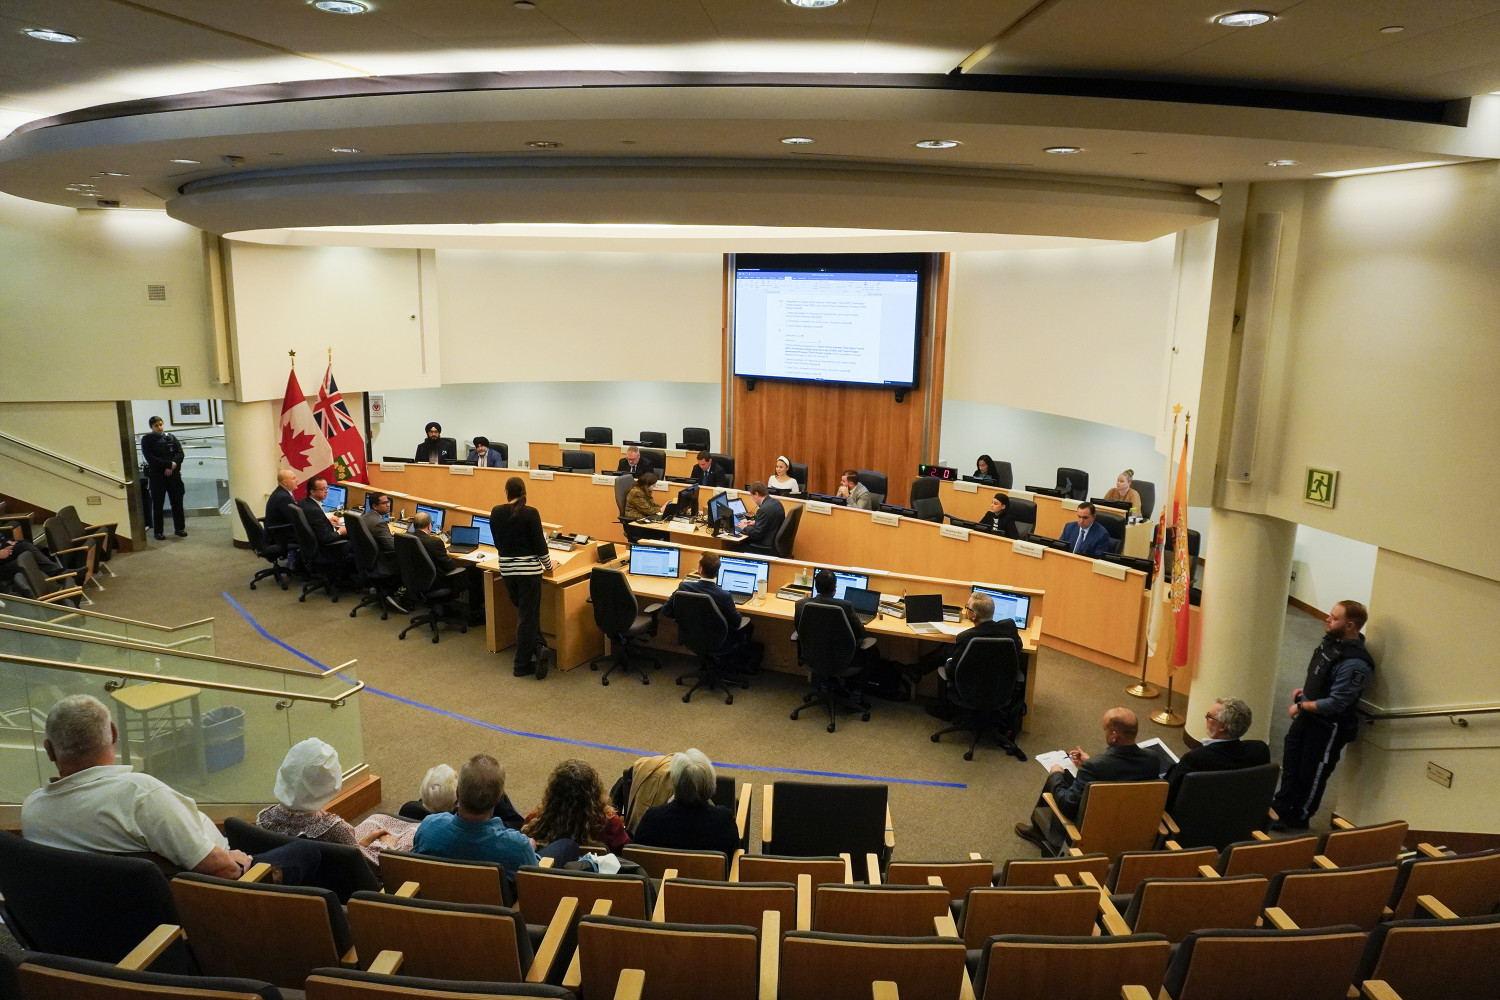 Brampton Council makes over $8M in last minute budget additions; business community raises red flags over poor planning